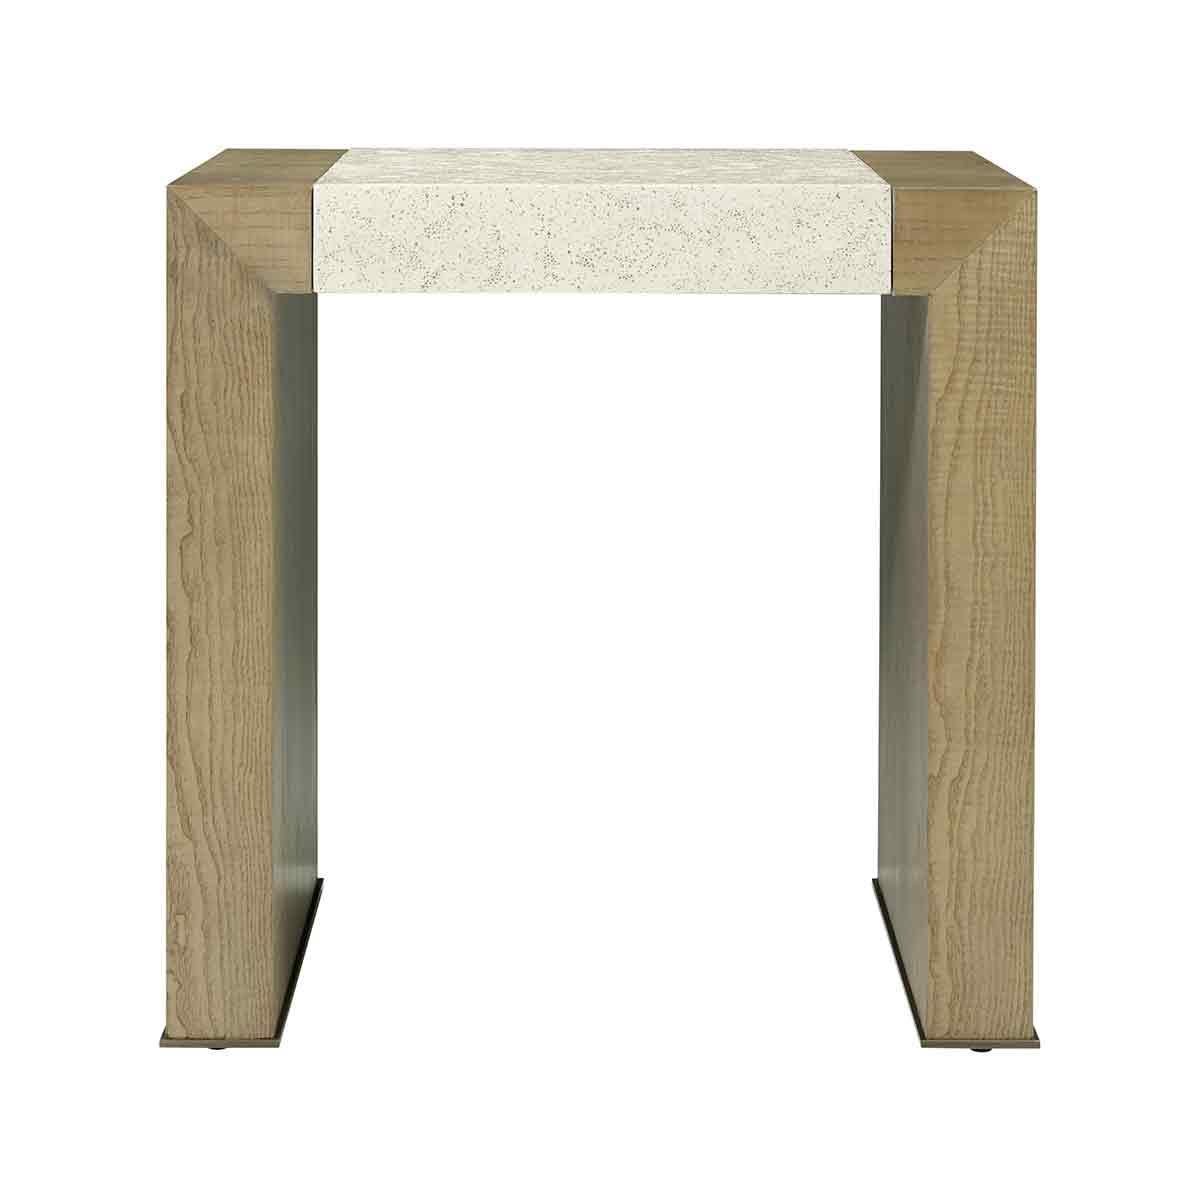 A modern side table made of figured cathedral ash in our light dune finish with our exclusive Mineral finish at the top and metal detail at the base of the legs in a bronze finish.
Dimensions: 24